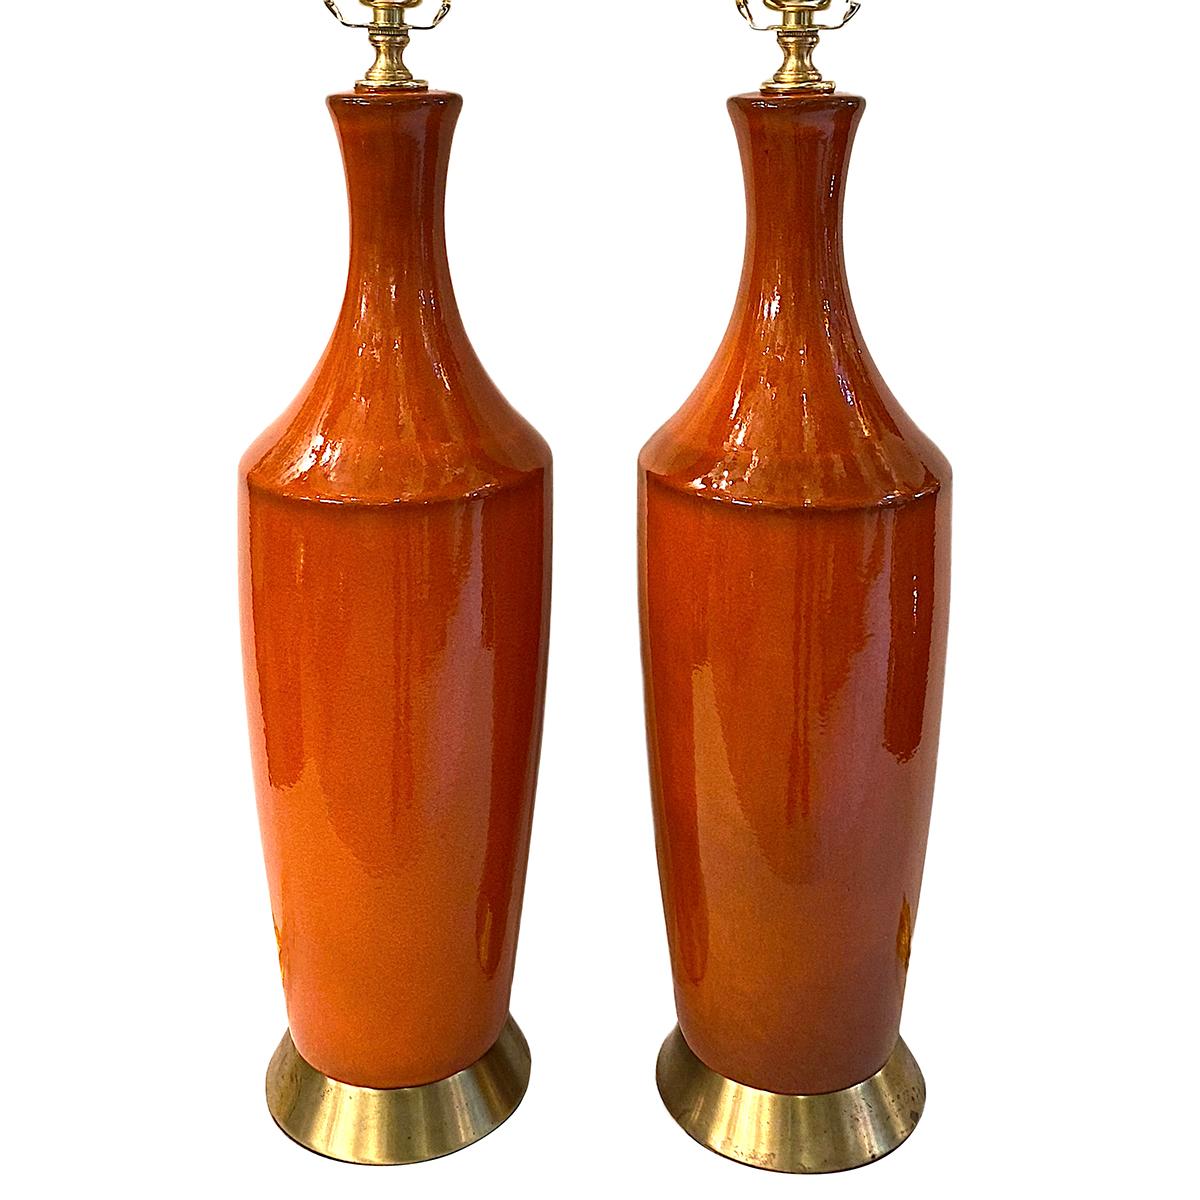 Pair of midcentury Italian porcelain table lamps.

Measurements:
Height of body: 19.5?
Height to shade rest: 30?
Diameter: 6?